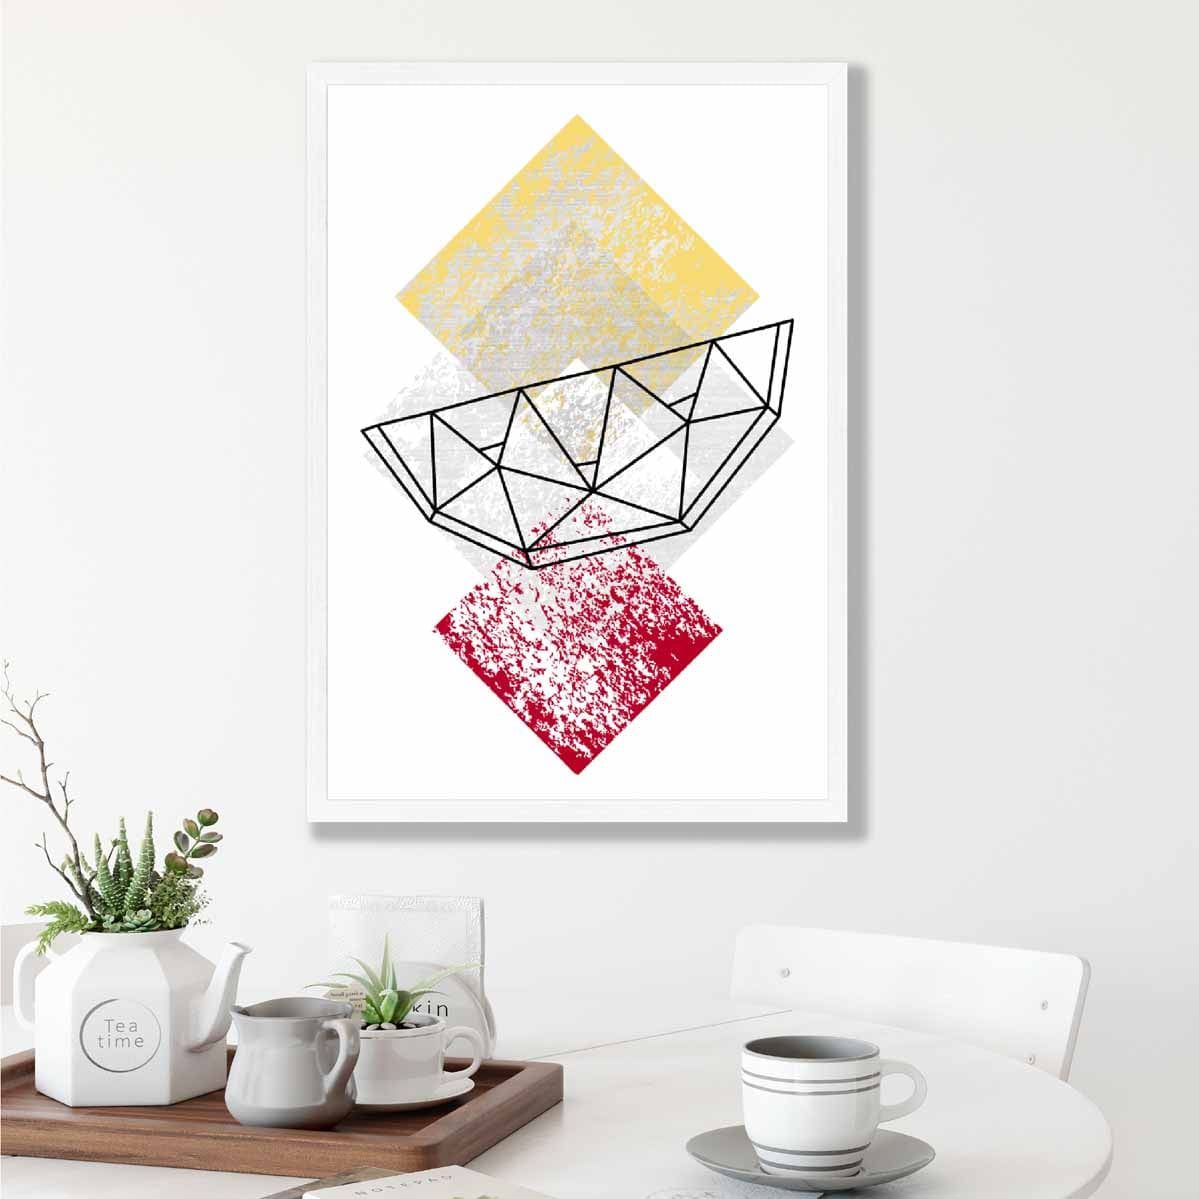 Geometric Fruit Line art Poster of Watermelon Textured Yellow Grey Red